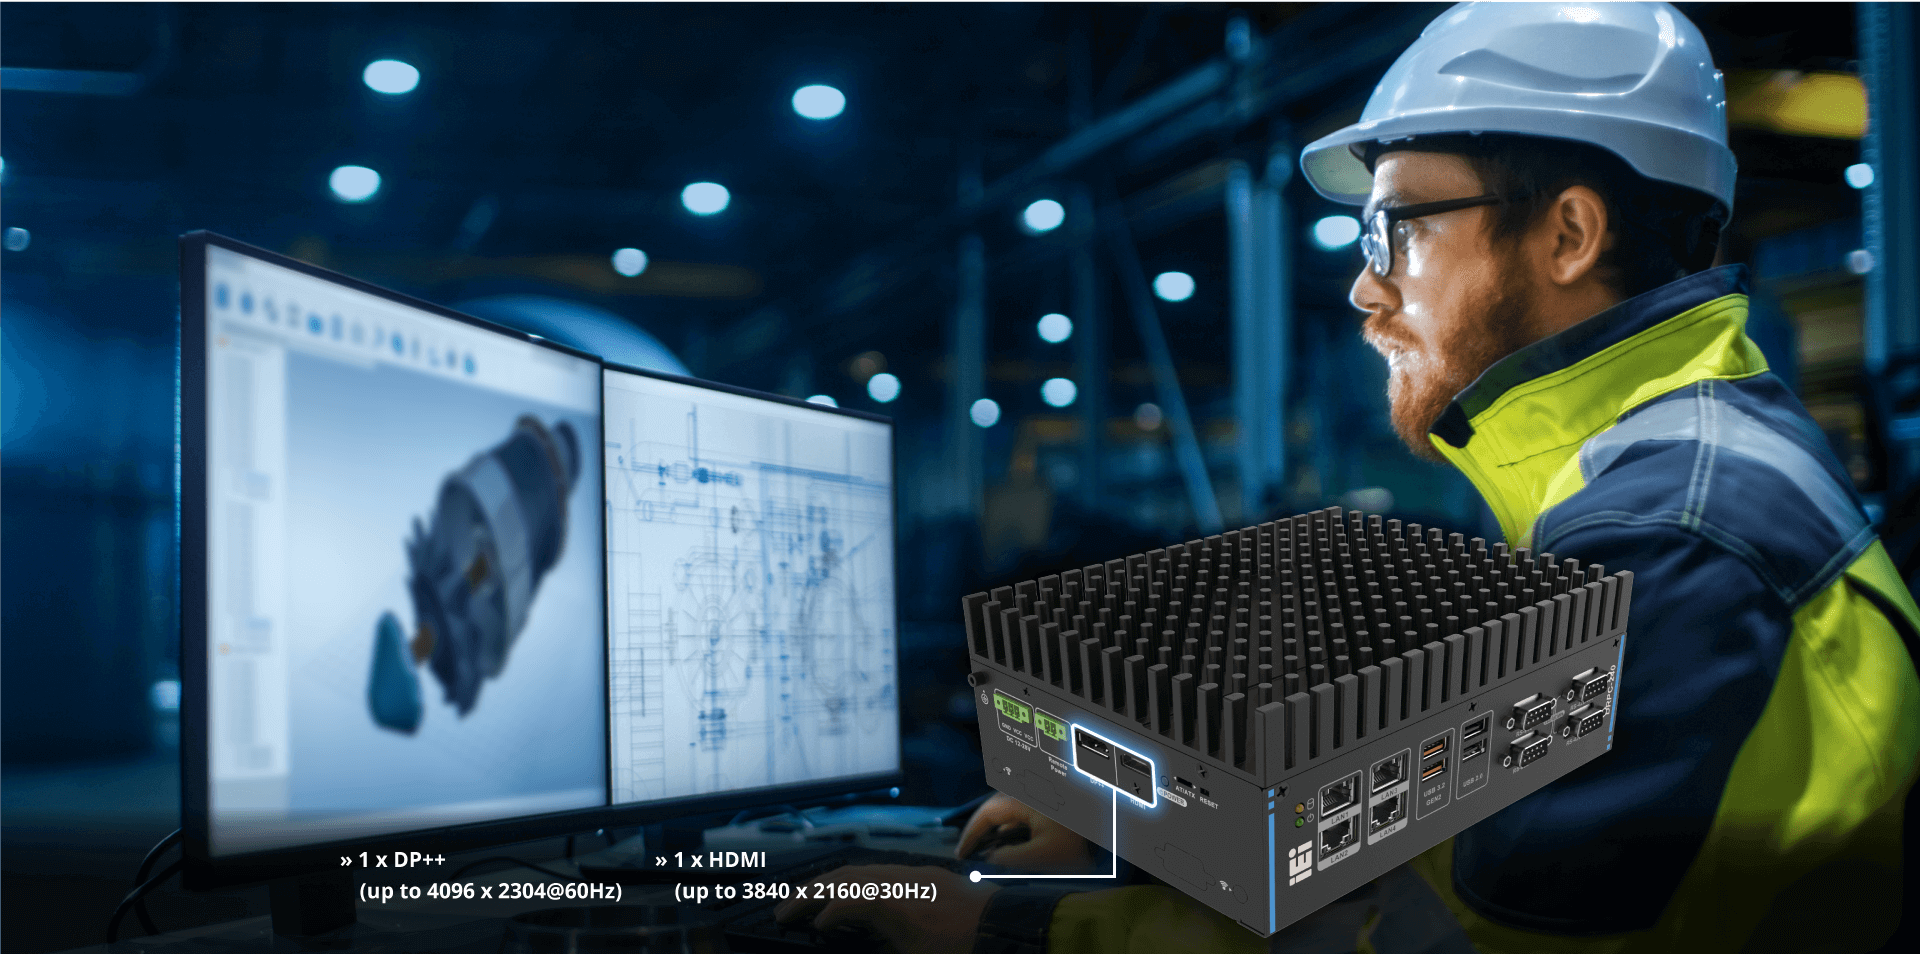 DRPC-240 embedded system with HDMI™ port and DP++ port highlighted